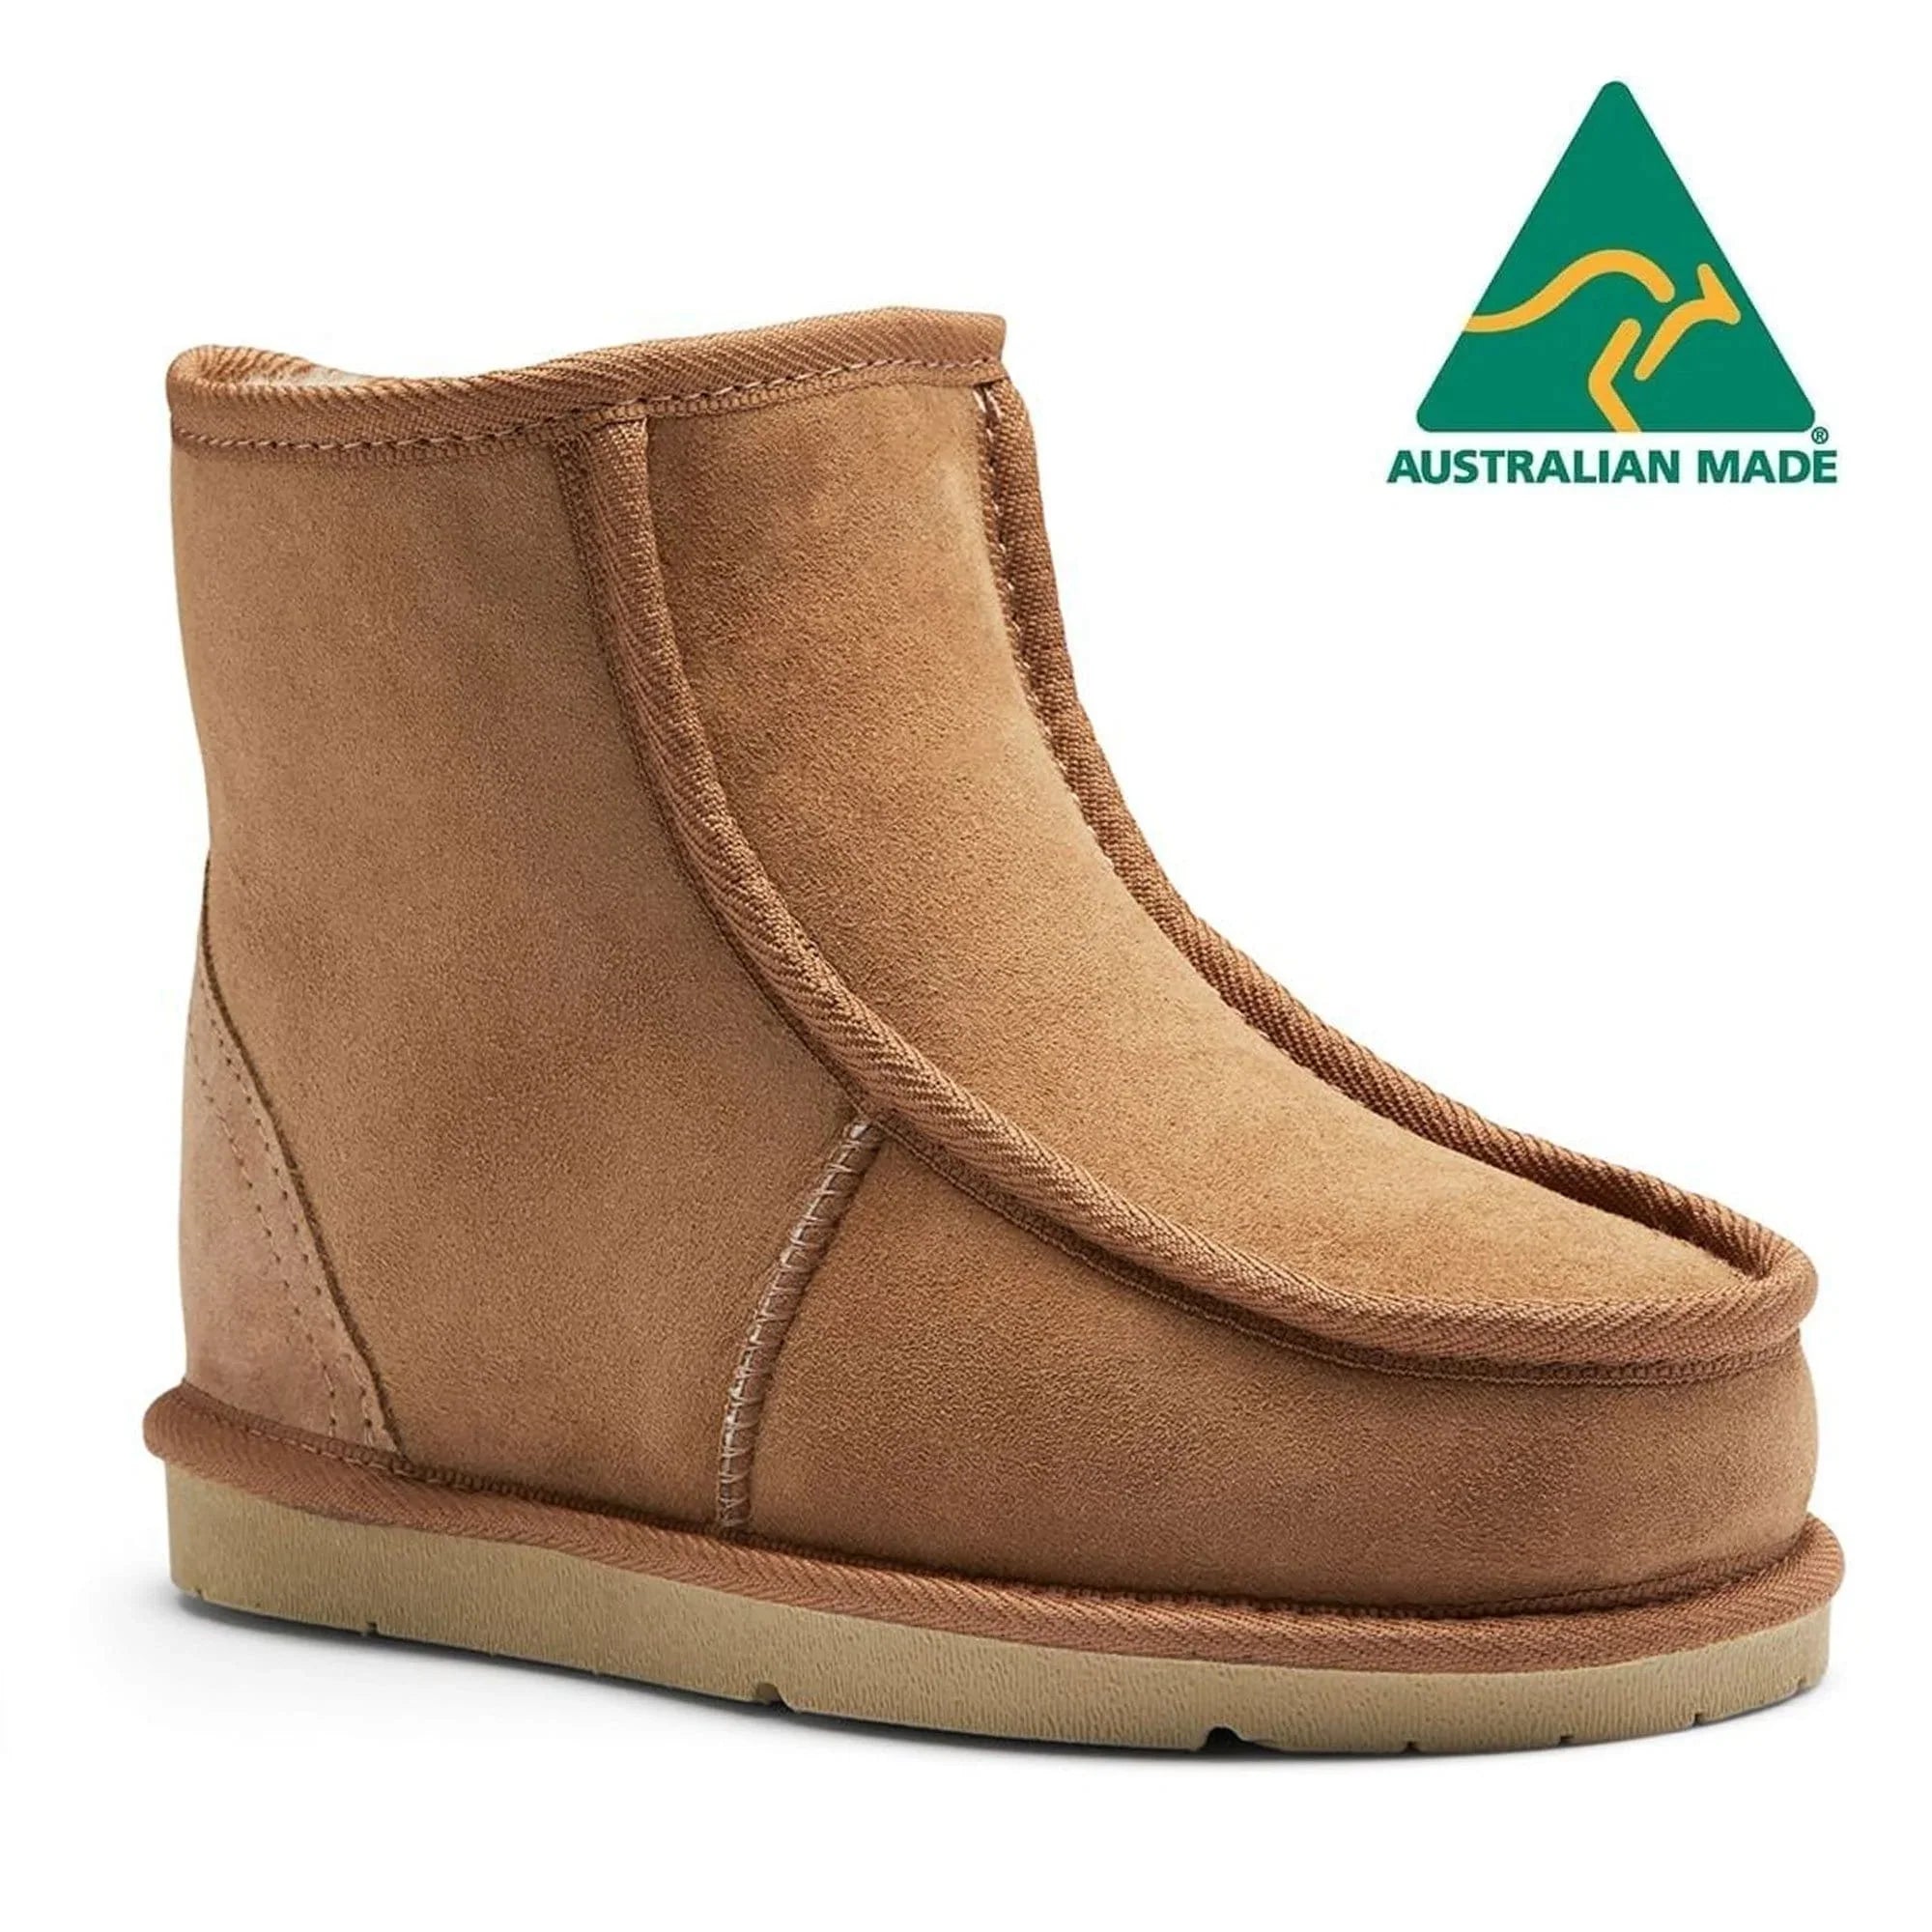 UGG Deluxe Boots -Made in Australia